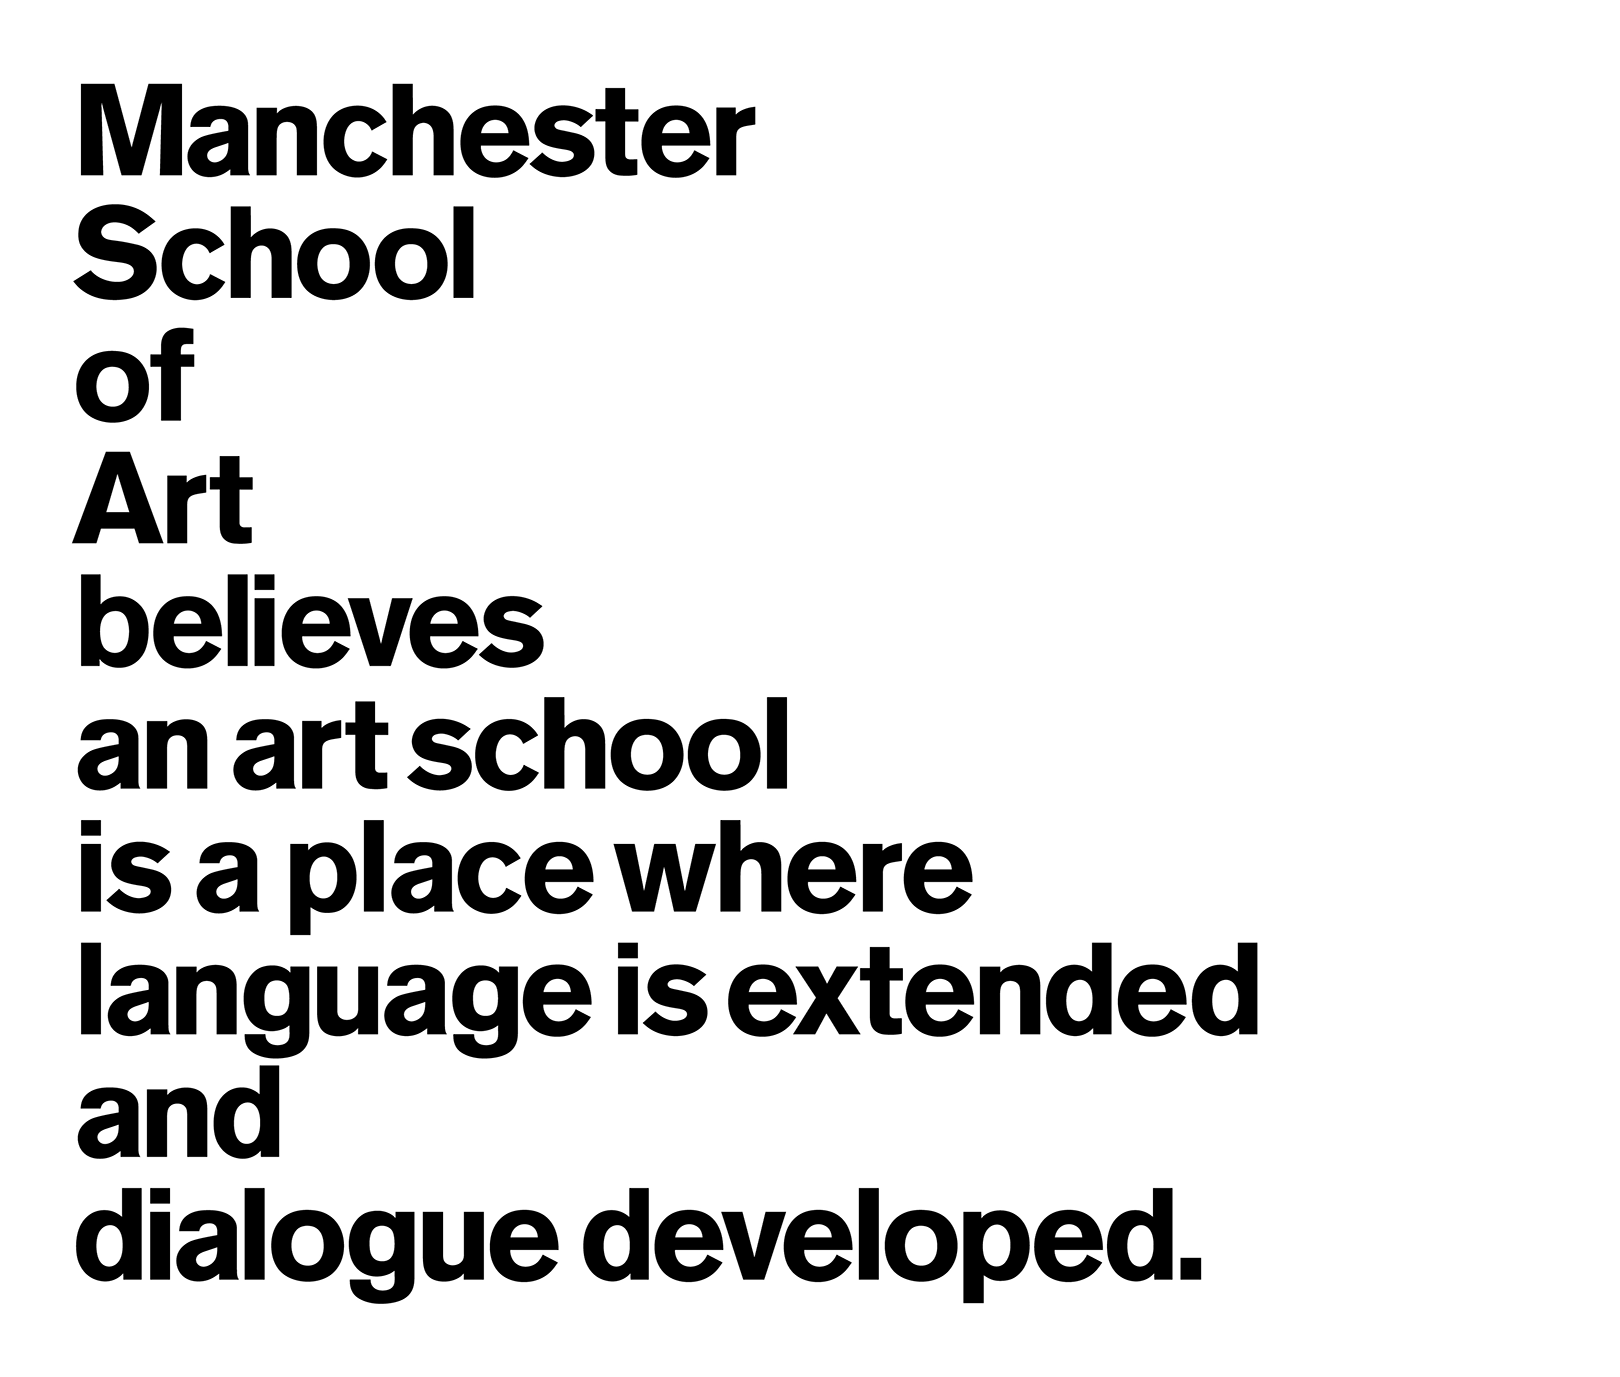 Manchester School of Art believes an art school is a place where language is extended and dialogue developed.